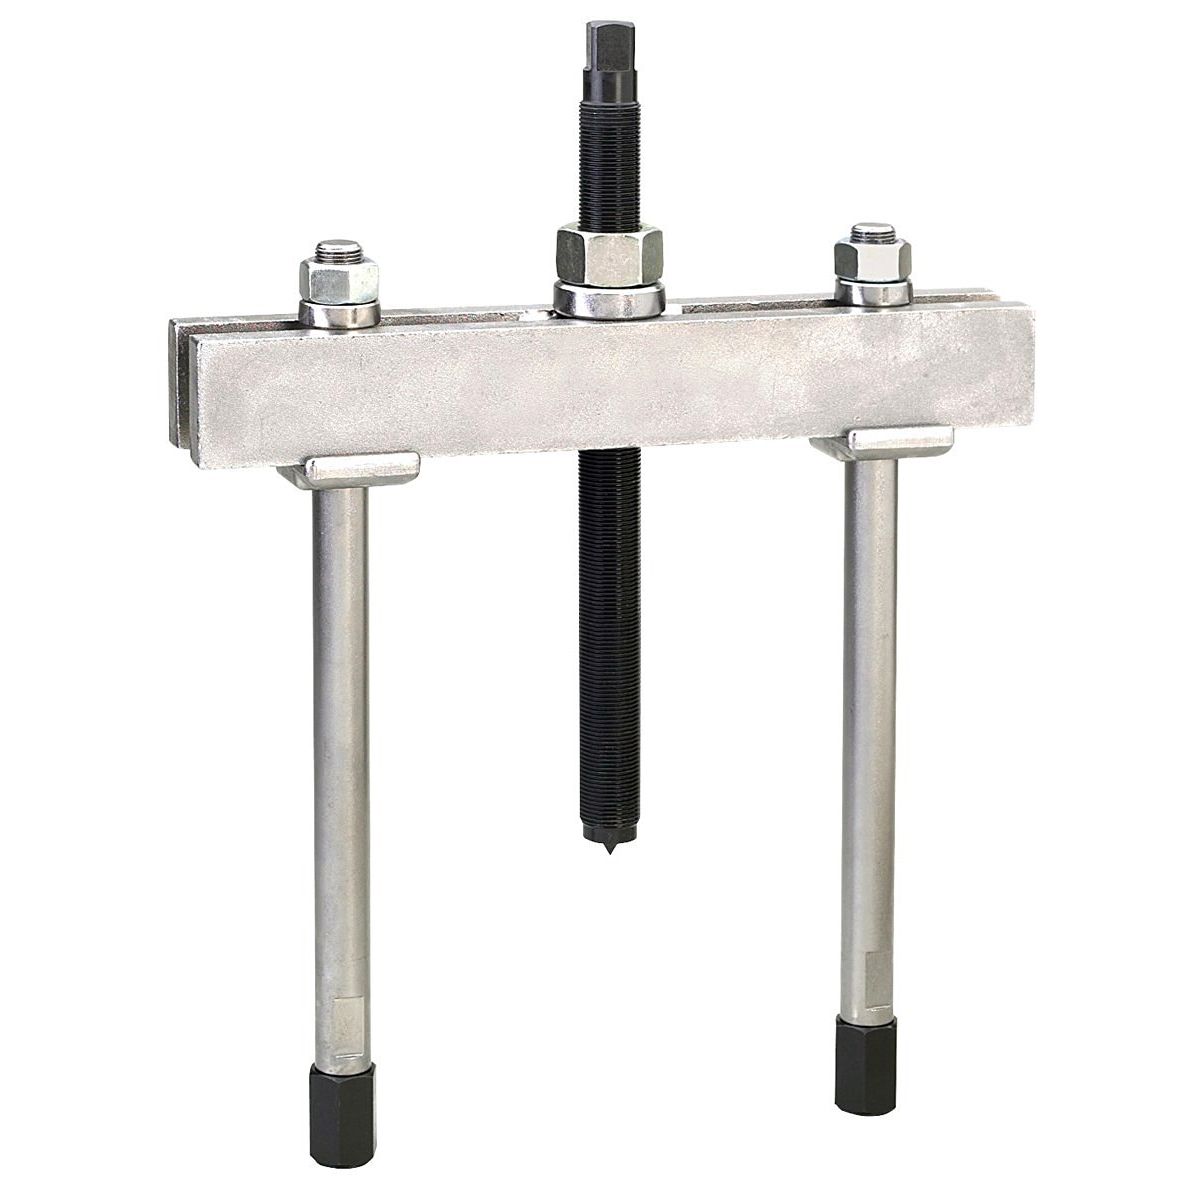 OTC 1153 Internal Pulling Attachment Bearing Puller for Blind Holes w/Adapter 